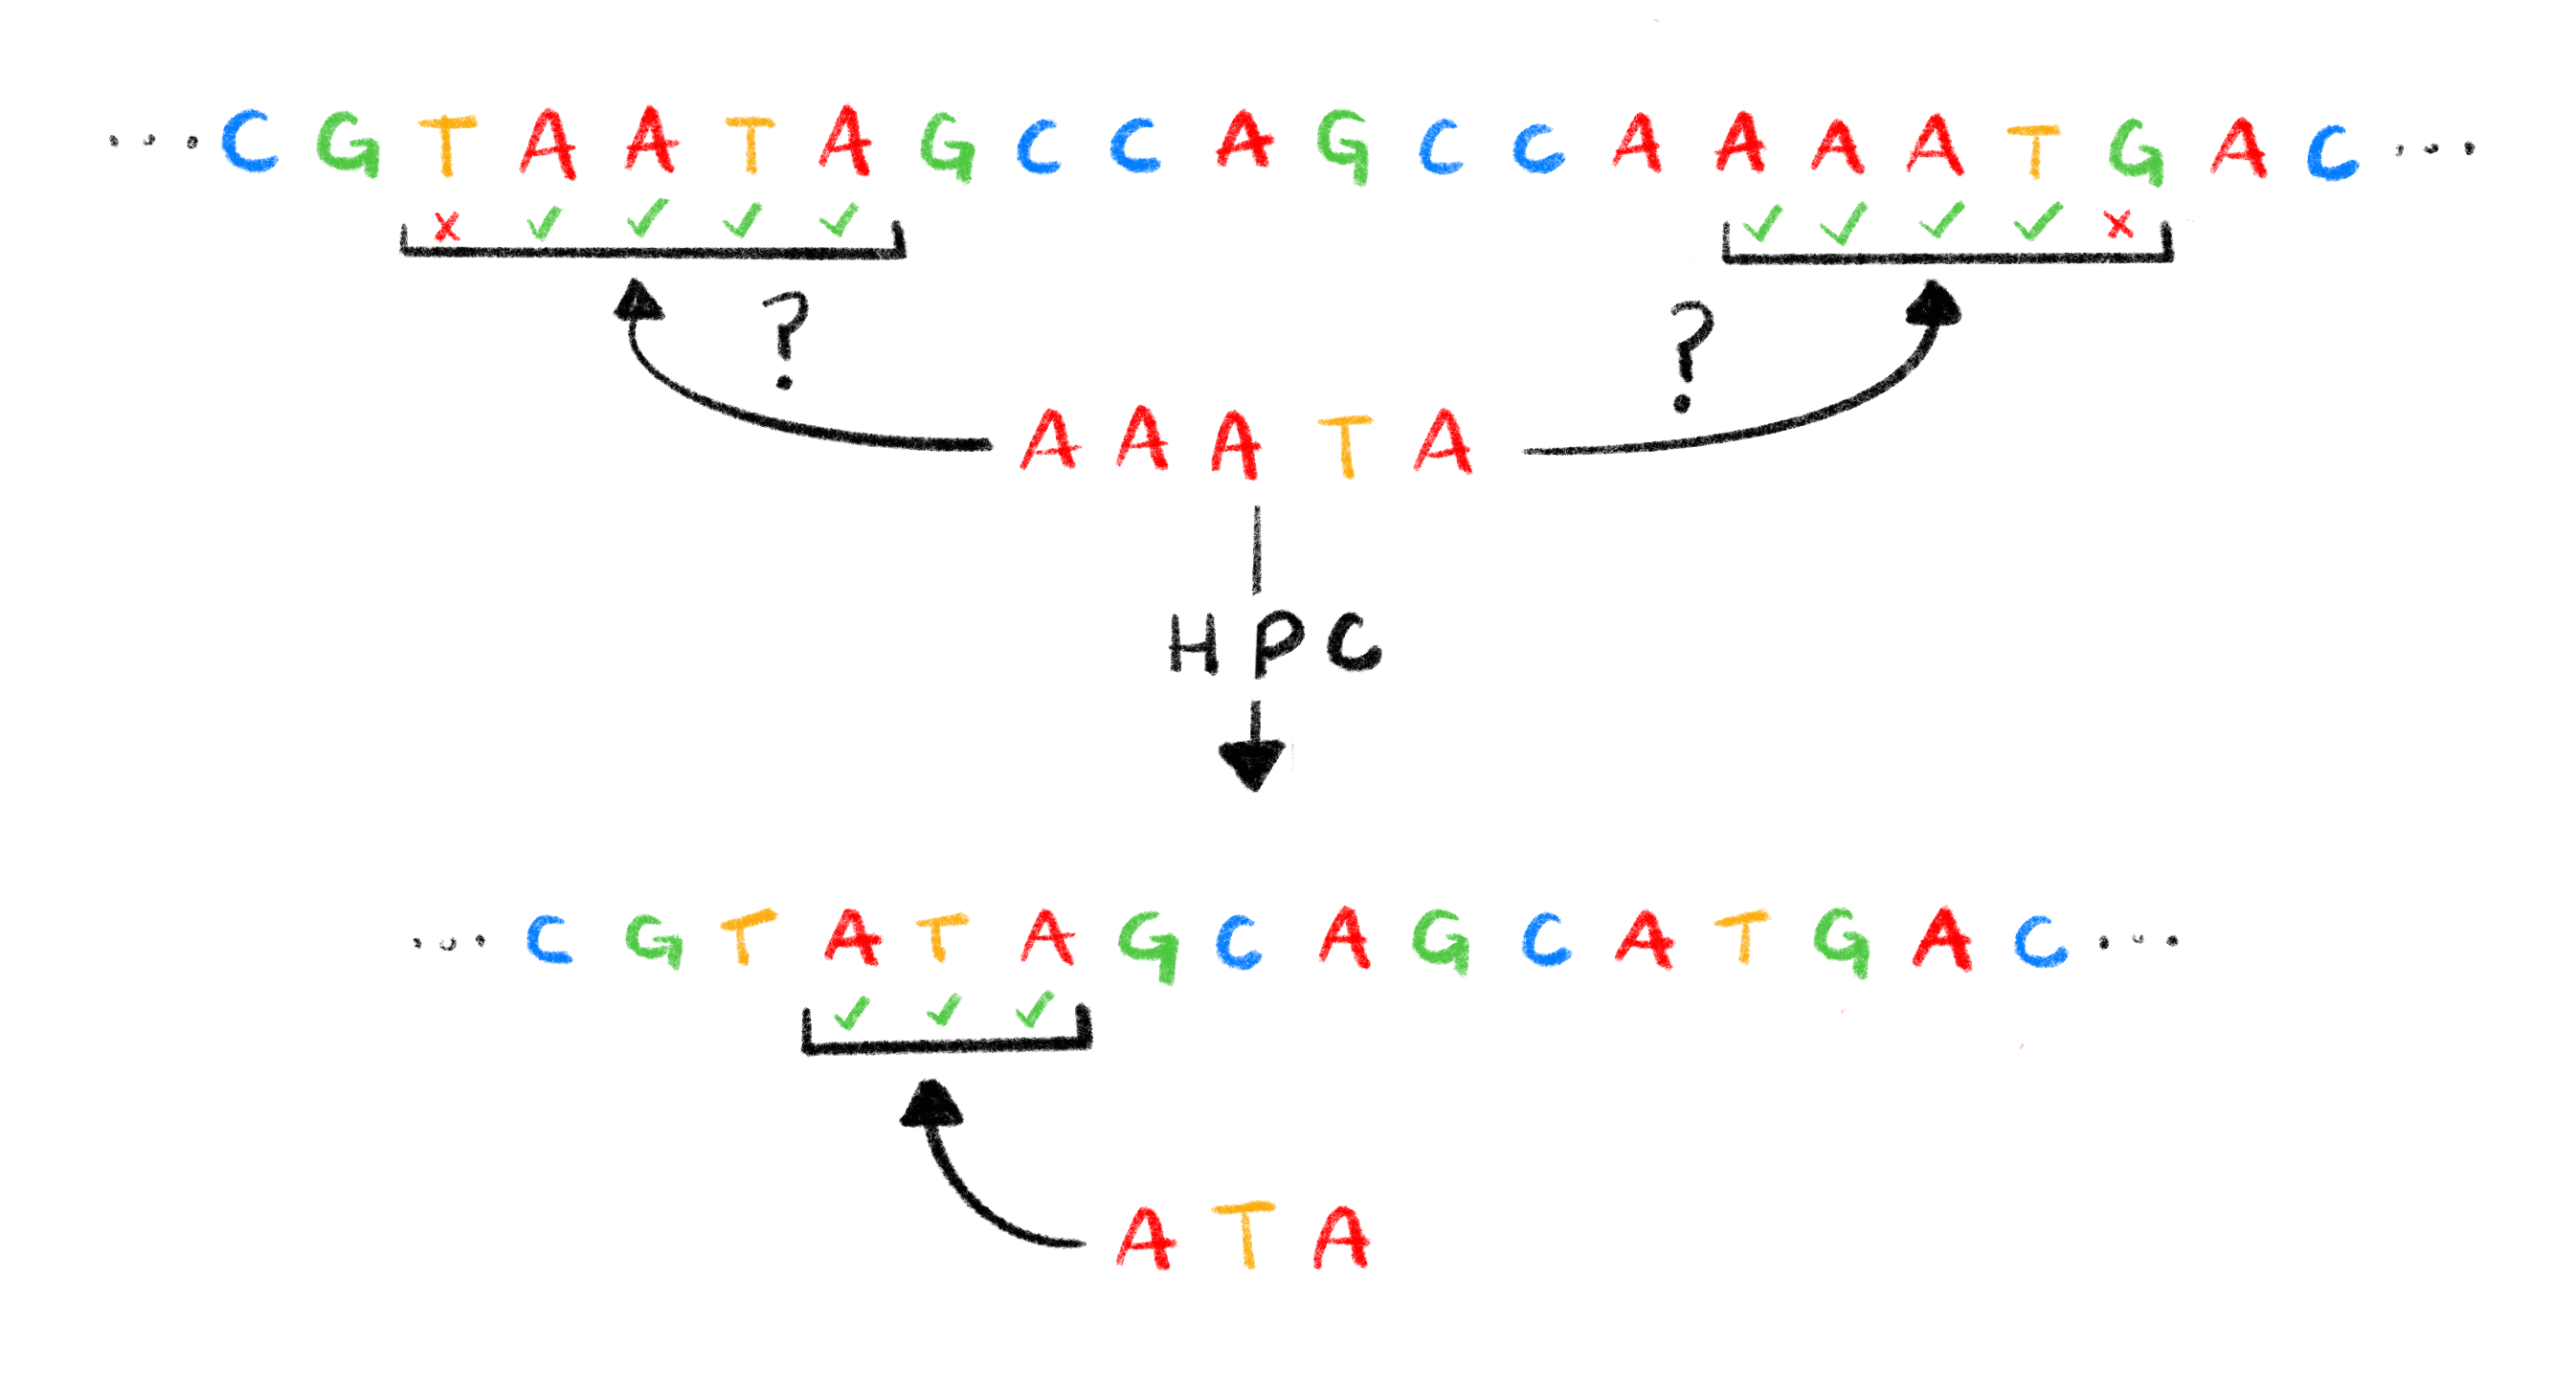 **Homopolymer compression can help resolve ambiguities due to sequencing errors.**  
A read with homopolymer related sequencing errors can be homologous to two different regions of the reference genome, with one discrepancy for each region. After applying HPC, this ambiguity is properly accounted for and the read is homologous to only one region. This figure, however, only shows one way homopolymers can be detrimental and others are possible^[Homopolymer indels can be harmful in opposite circumstances as well. Let us consider, for example, a read that should correspond to several repetitions of a conserved motif. Homopolymer indels can artificially resolve an ambiguity by making the read unique and prefer a specific repetition of the motif or entirely misplace the read.].
